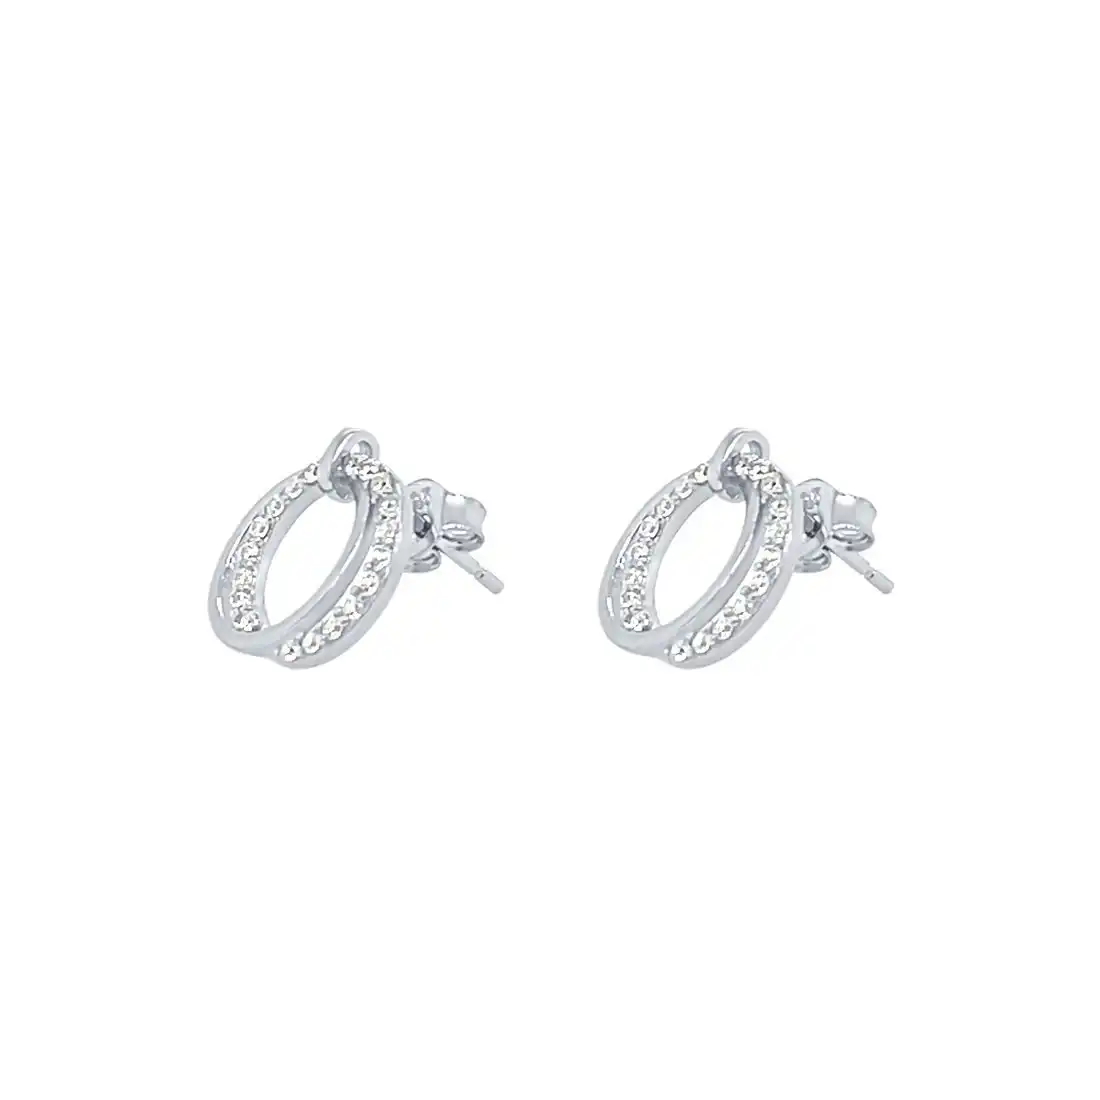 14mm Double Open Circle Stud Earrings with Cubic Zirconia in Sterling Silver